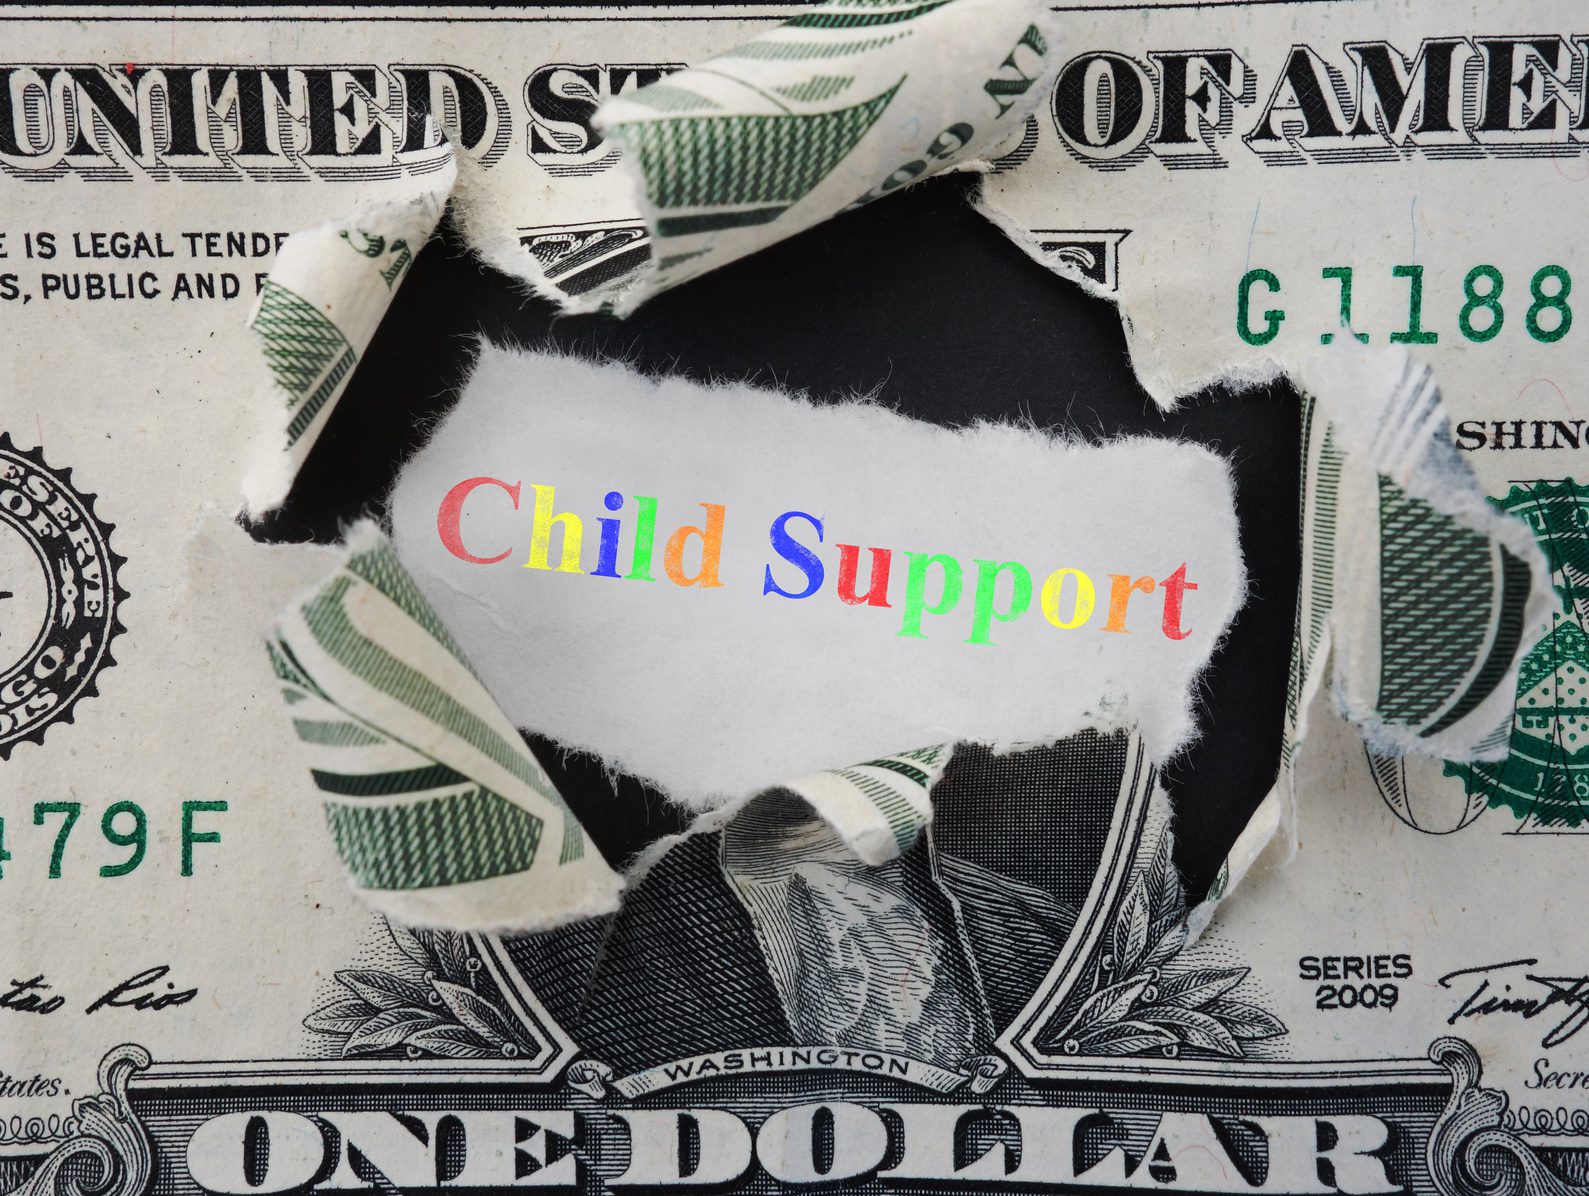 I Can’t Afford to Pay Child Support. What Can I Do?